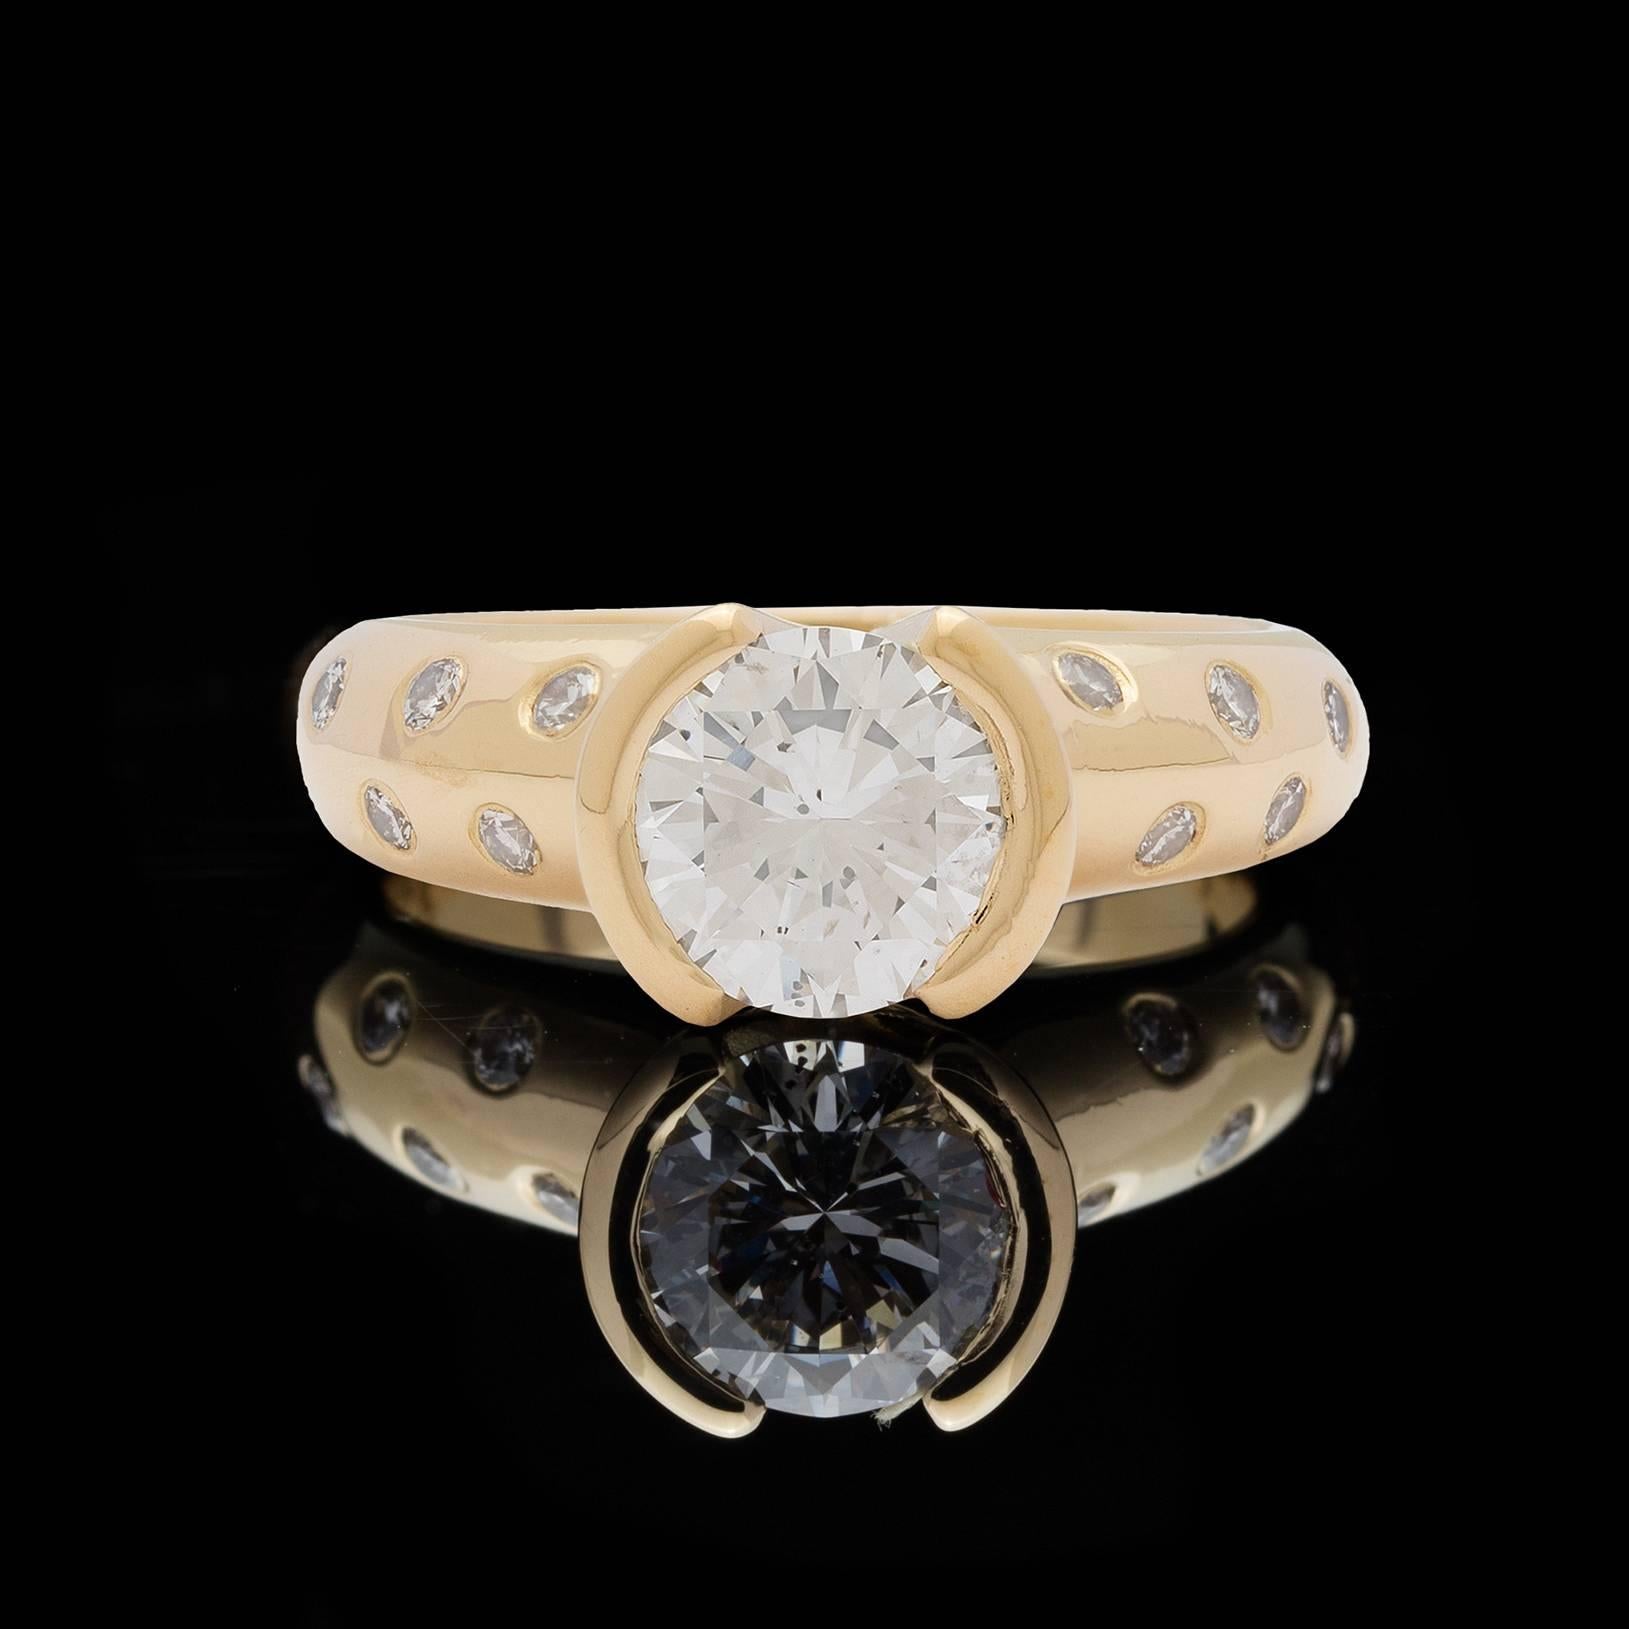 18k yellow gold etoile band ring features a 1.20 carat round brilliant cut diamond set in a half bezel mounting. Flushed-set on the sides are 10 round brilliant diamonds totaling 0.10 carats. Ring size is a 4.75 and can be sized. Contemporary look